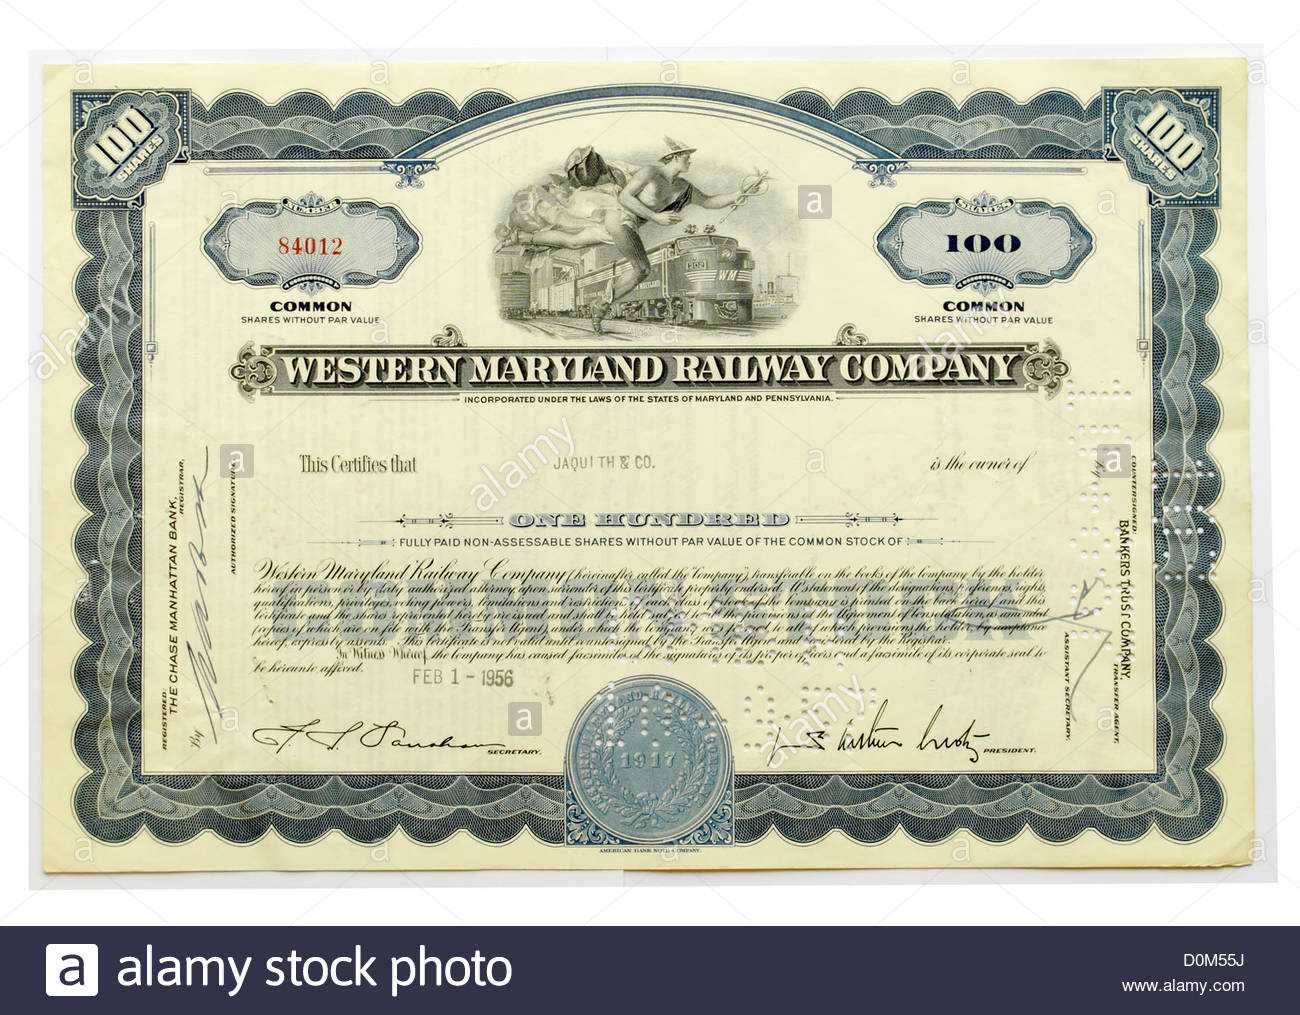 Share Certificate Stock Photos & Share Certificate Stock For Corporate Bond Certificate Template